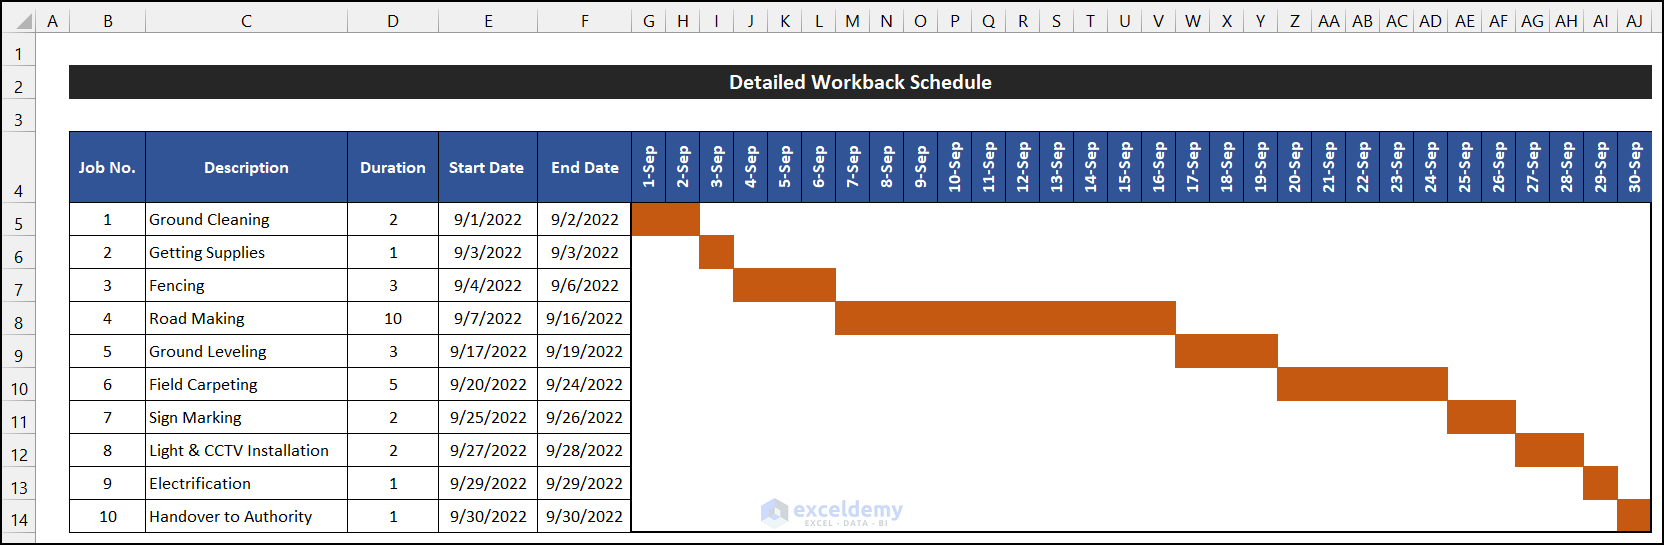 How to create a workback schedule in Excel